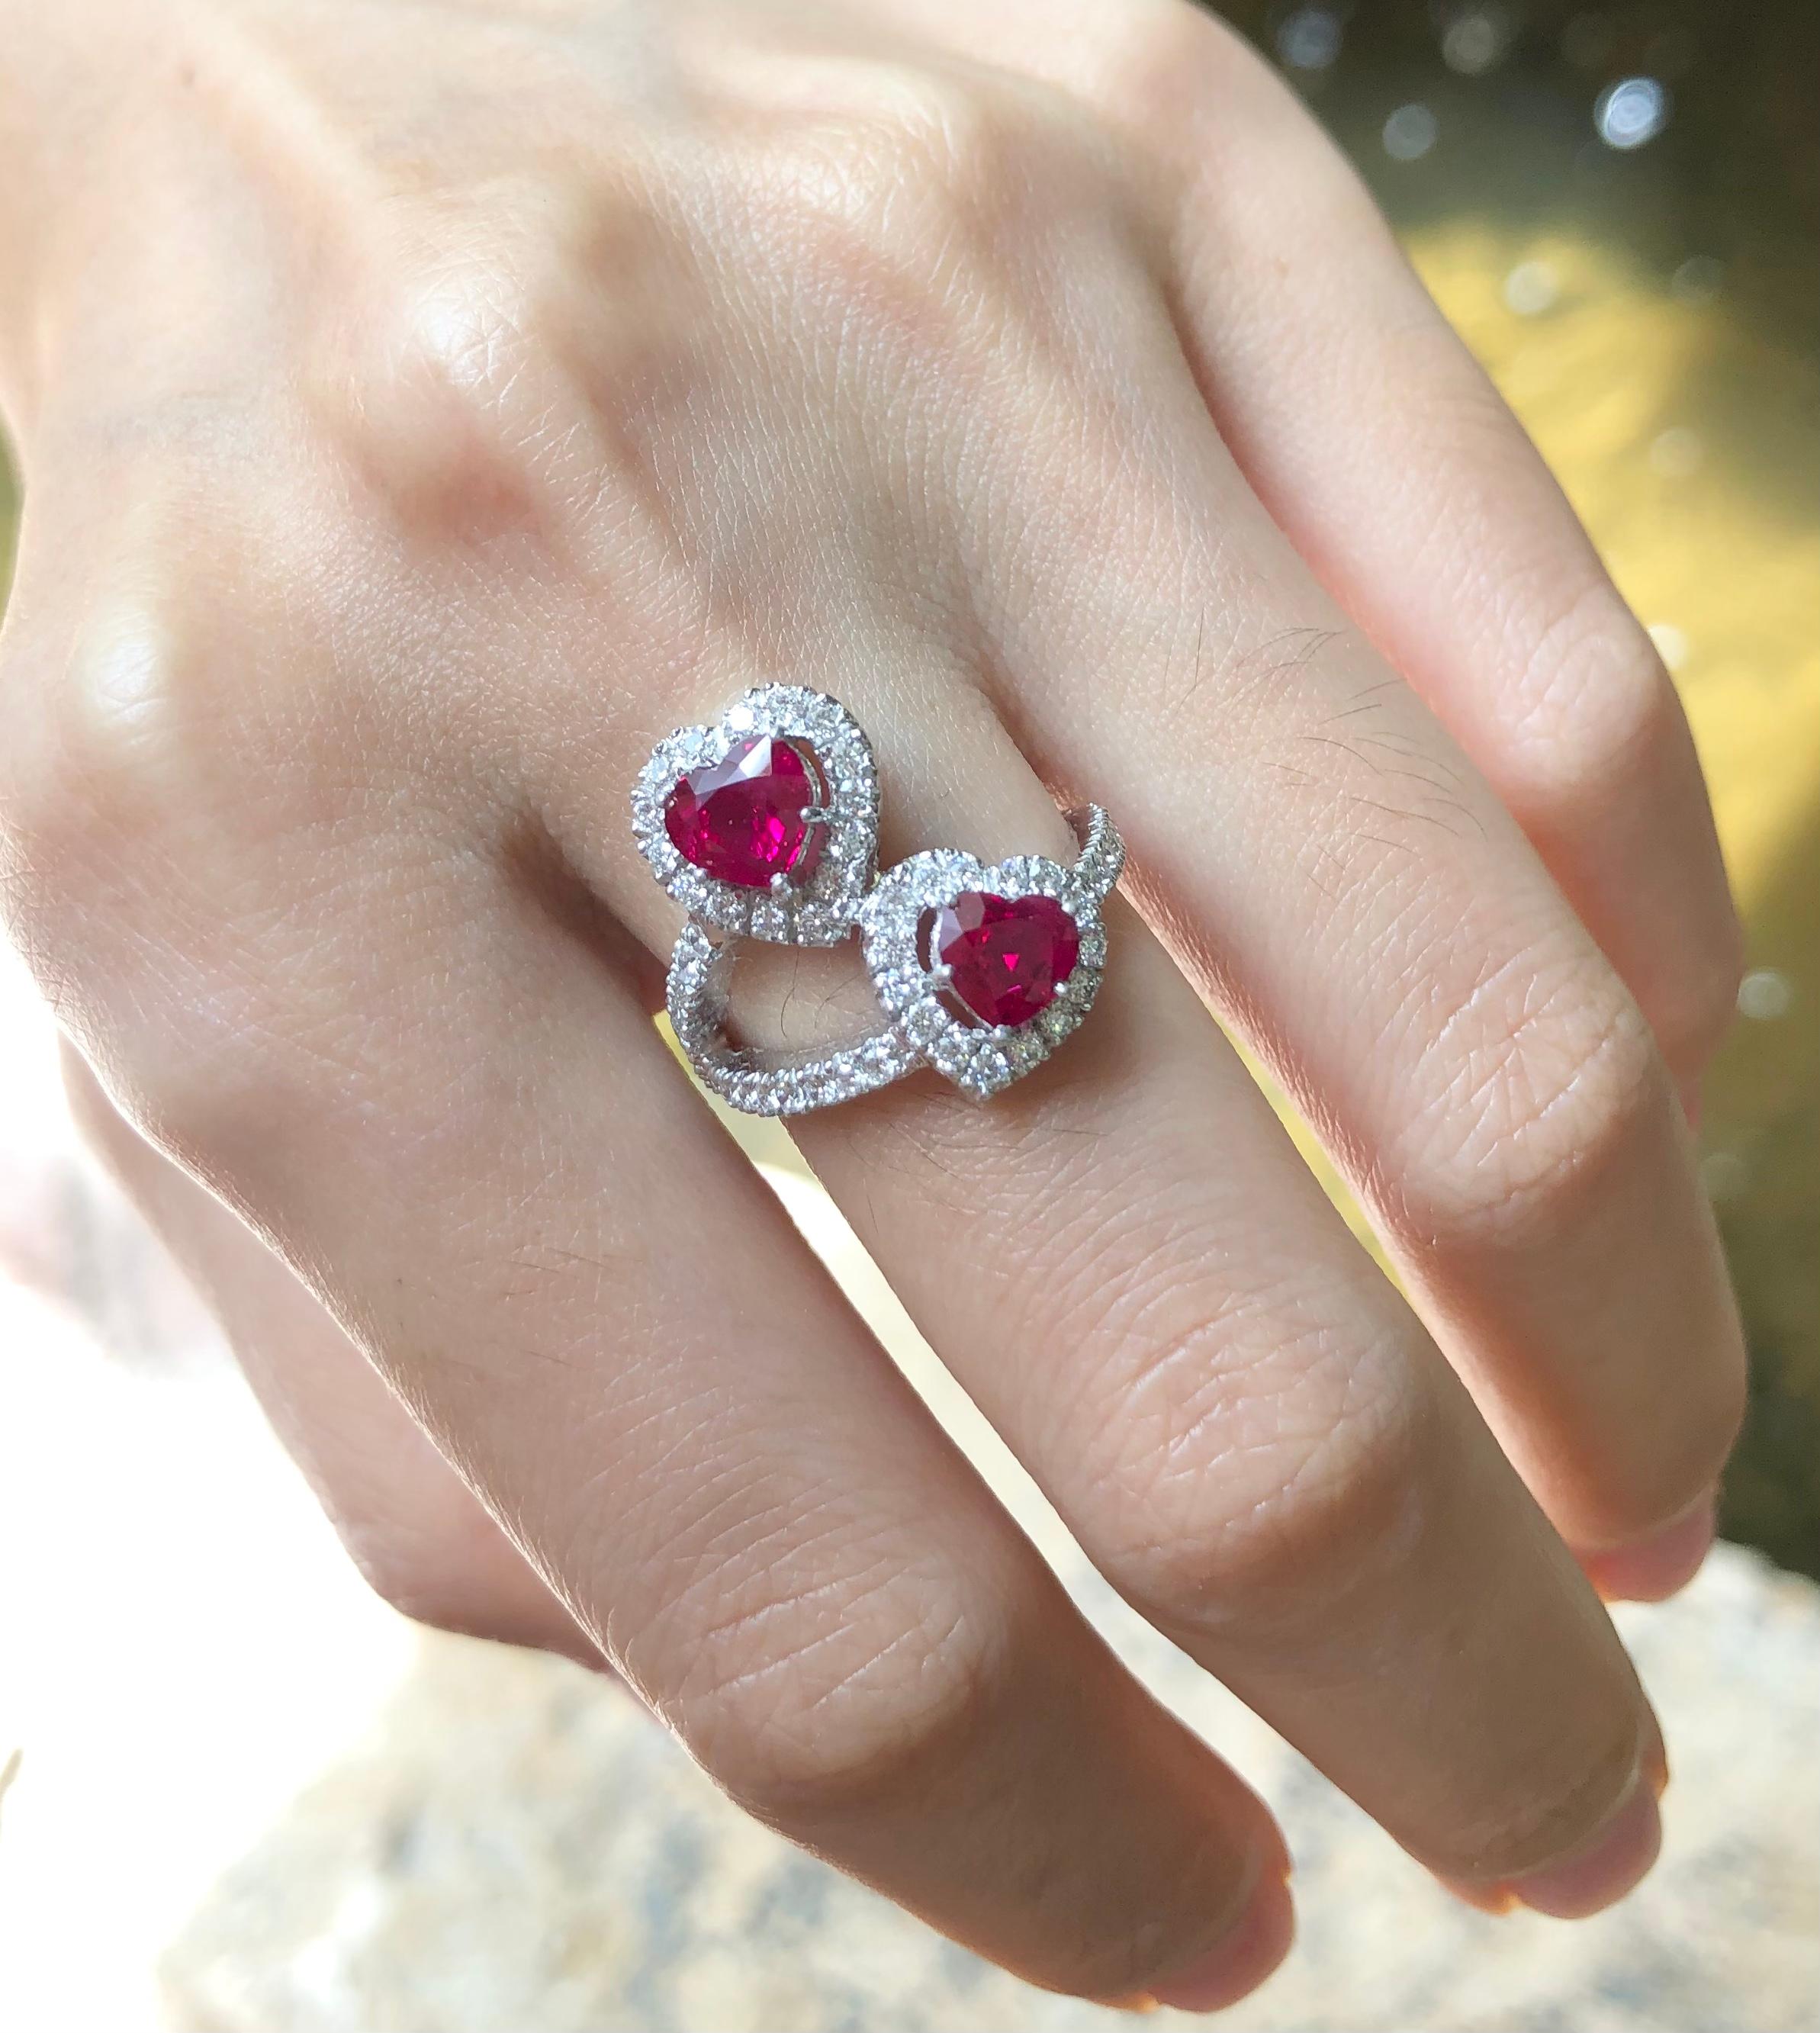 Ruby 1.52 carats with Diamond 0.71 carat Ring set in 18 Karat White Gold Settings

Width:  2.0 cm 
Length:  2.0 cm
Ring Size: 52
Total Weight: 5.79 grams

